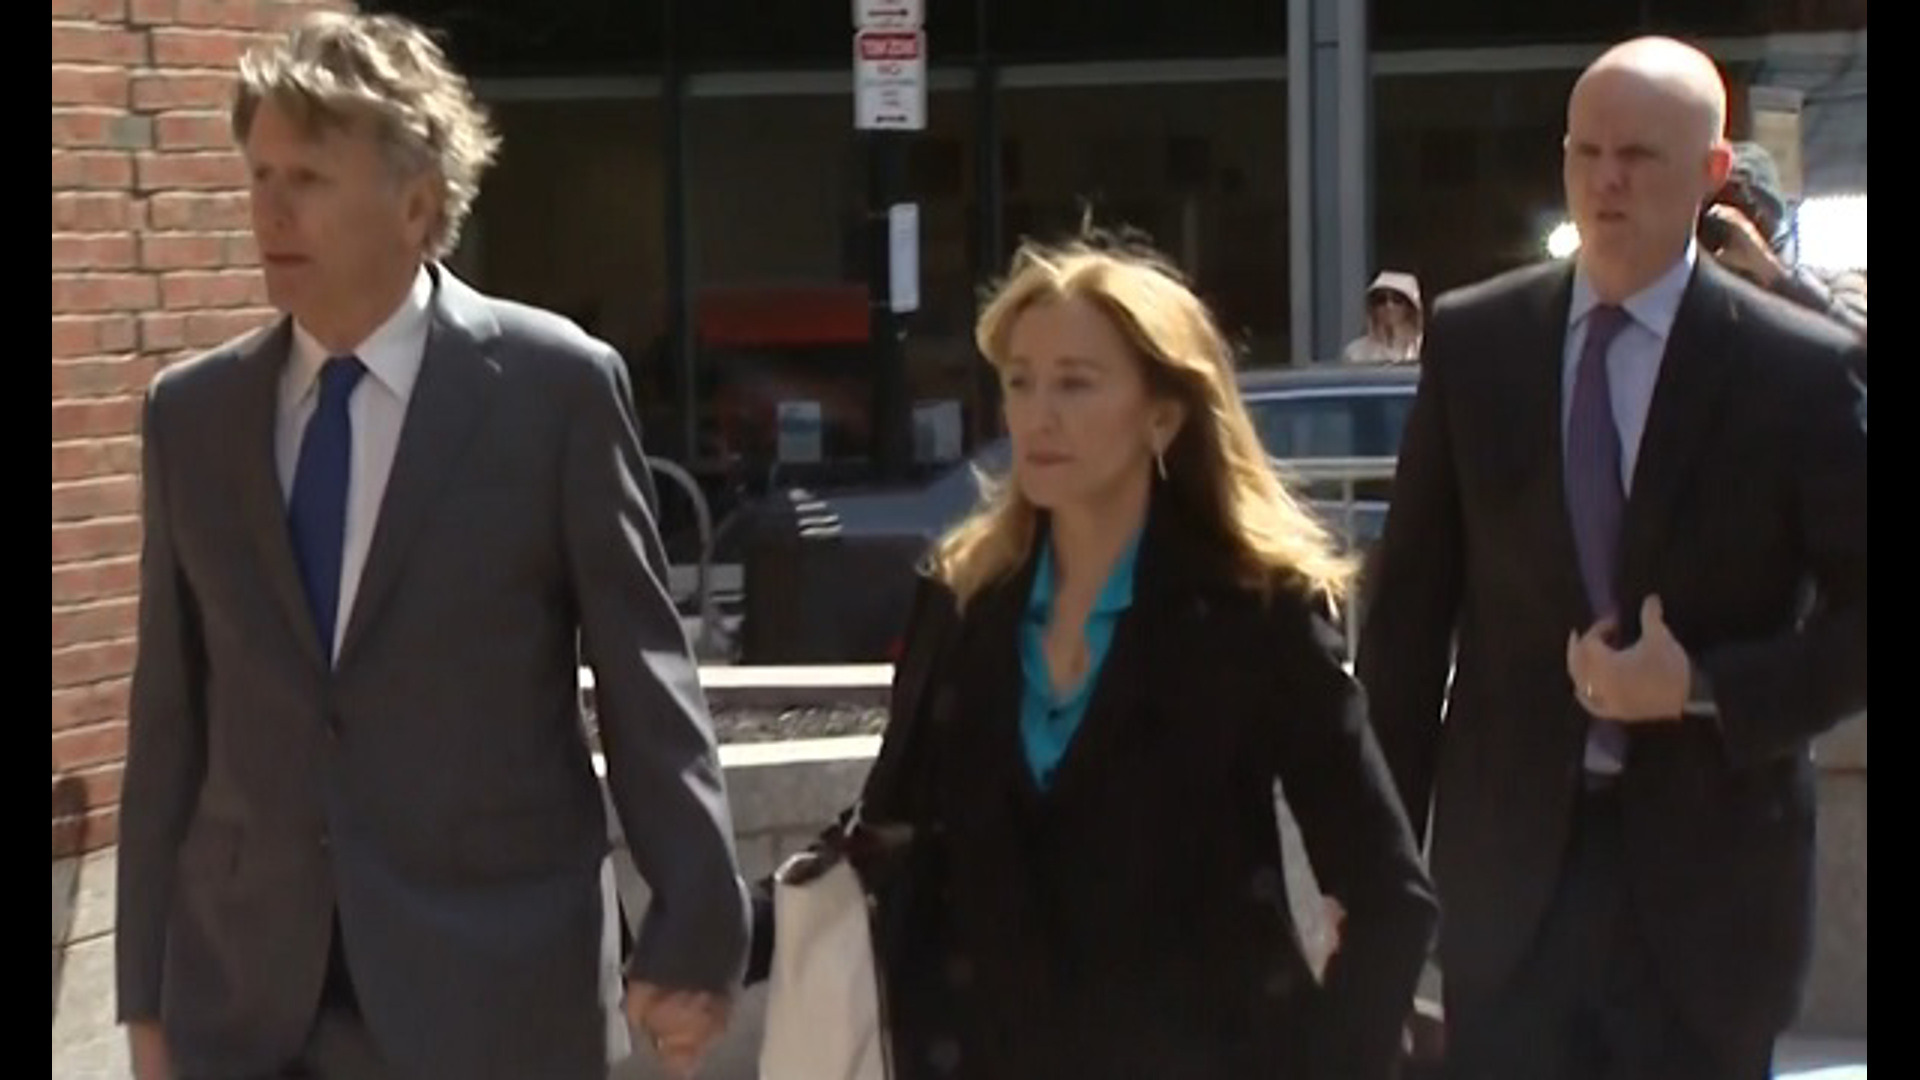 Felicity Huffman arrives in Boston court over college admissions scam.